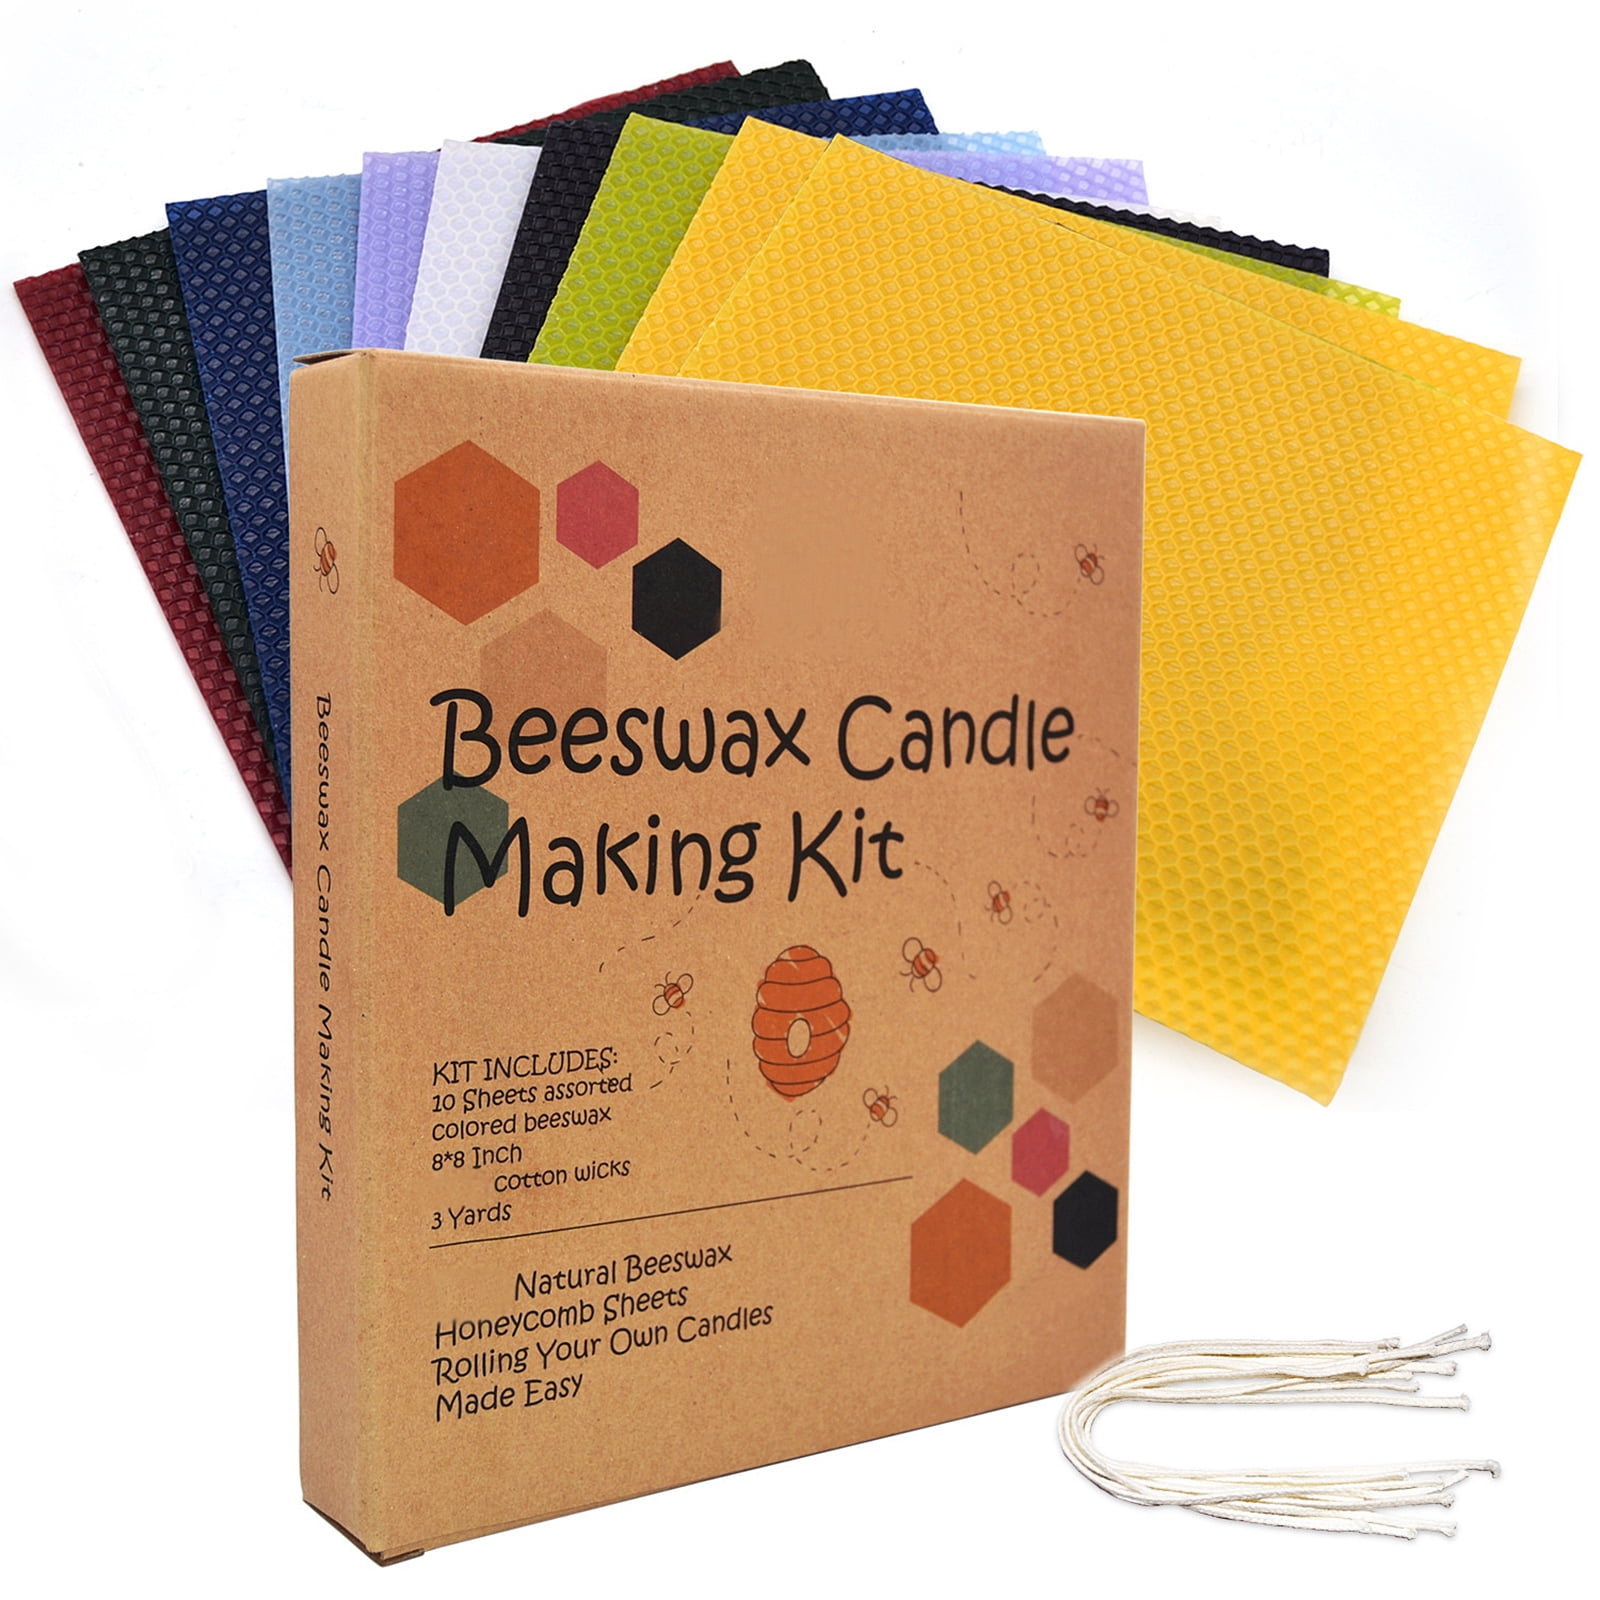 DIY Candle Set with 10 feet Cotton Wicks & 8-Inch Natural Beeswax Sheets Hand Rolling Beeswax Sheets for Taper Candles Unique Christmas Gift Cocaburra Beeswax Candle Making Kit 